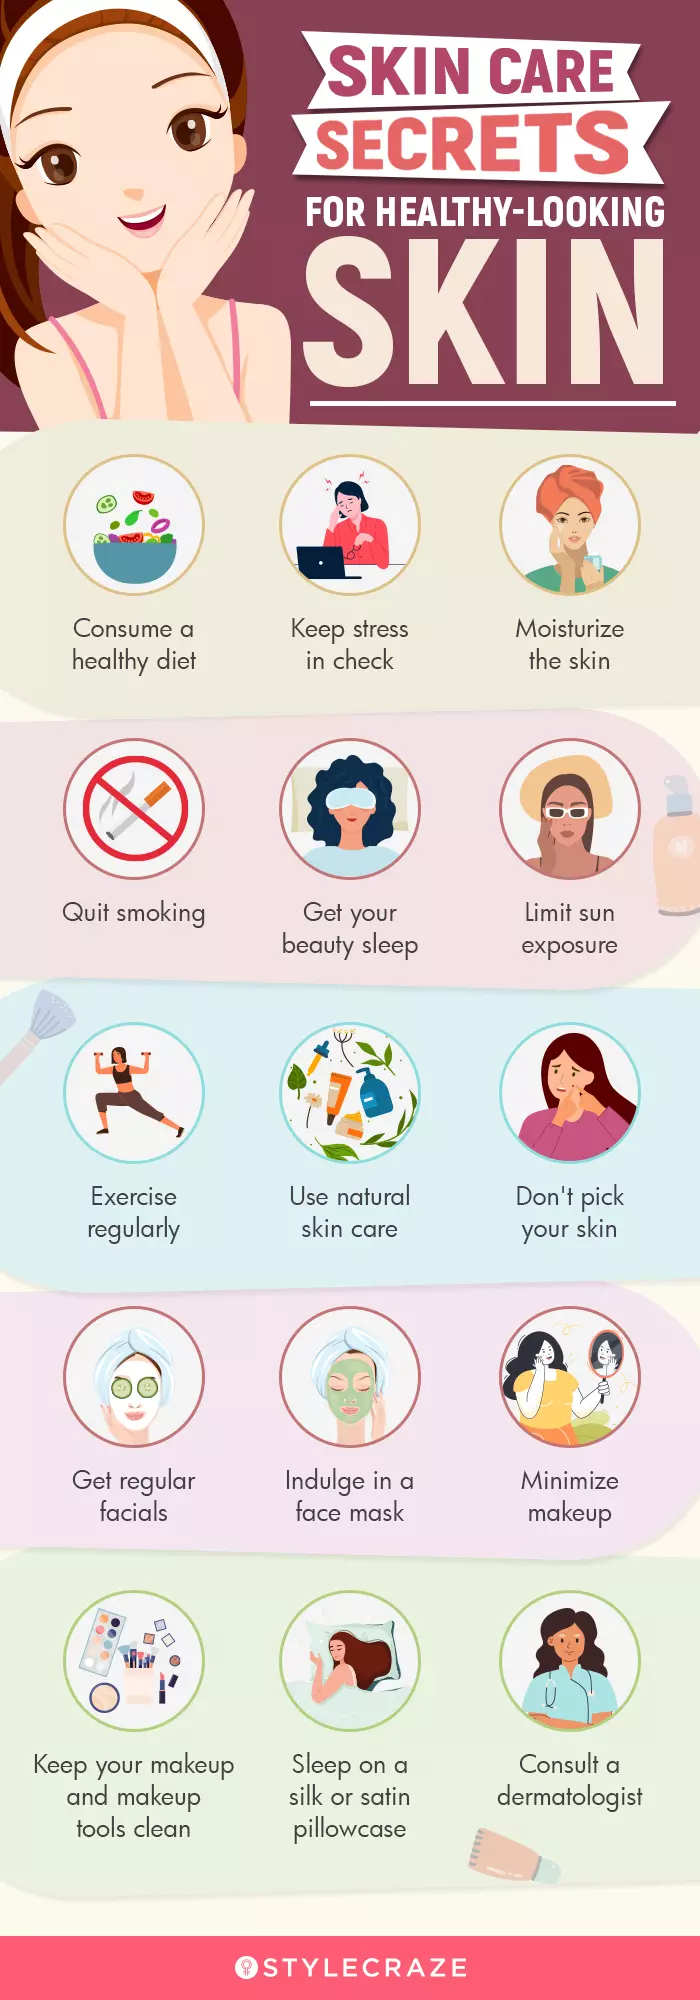 skin care secrets for healthy skin (infographic)